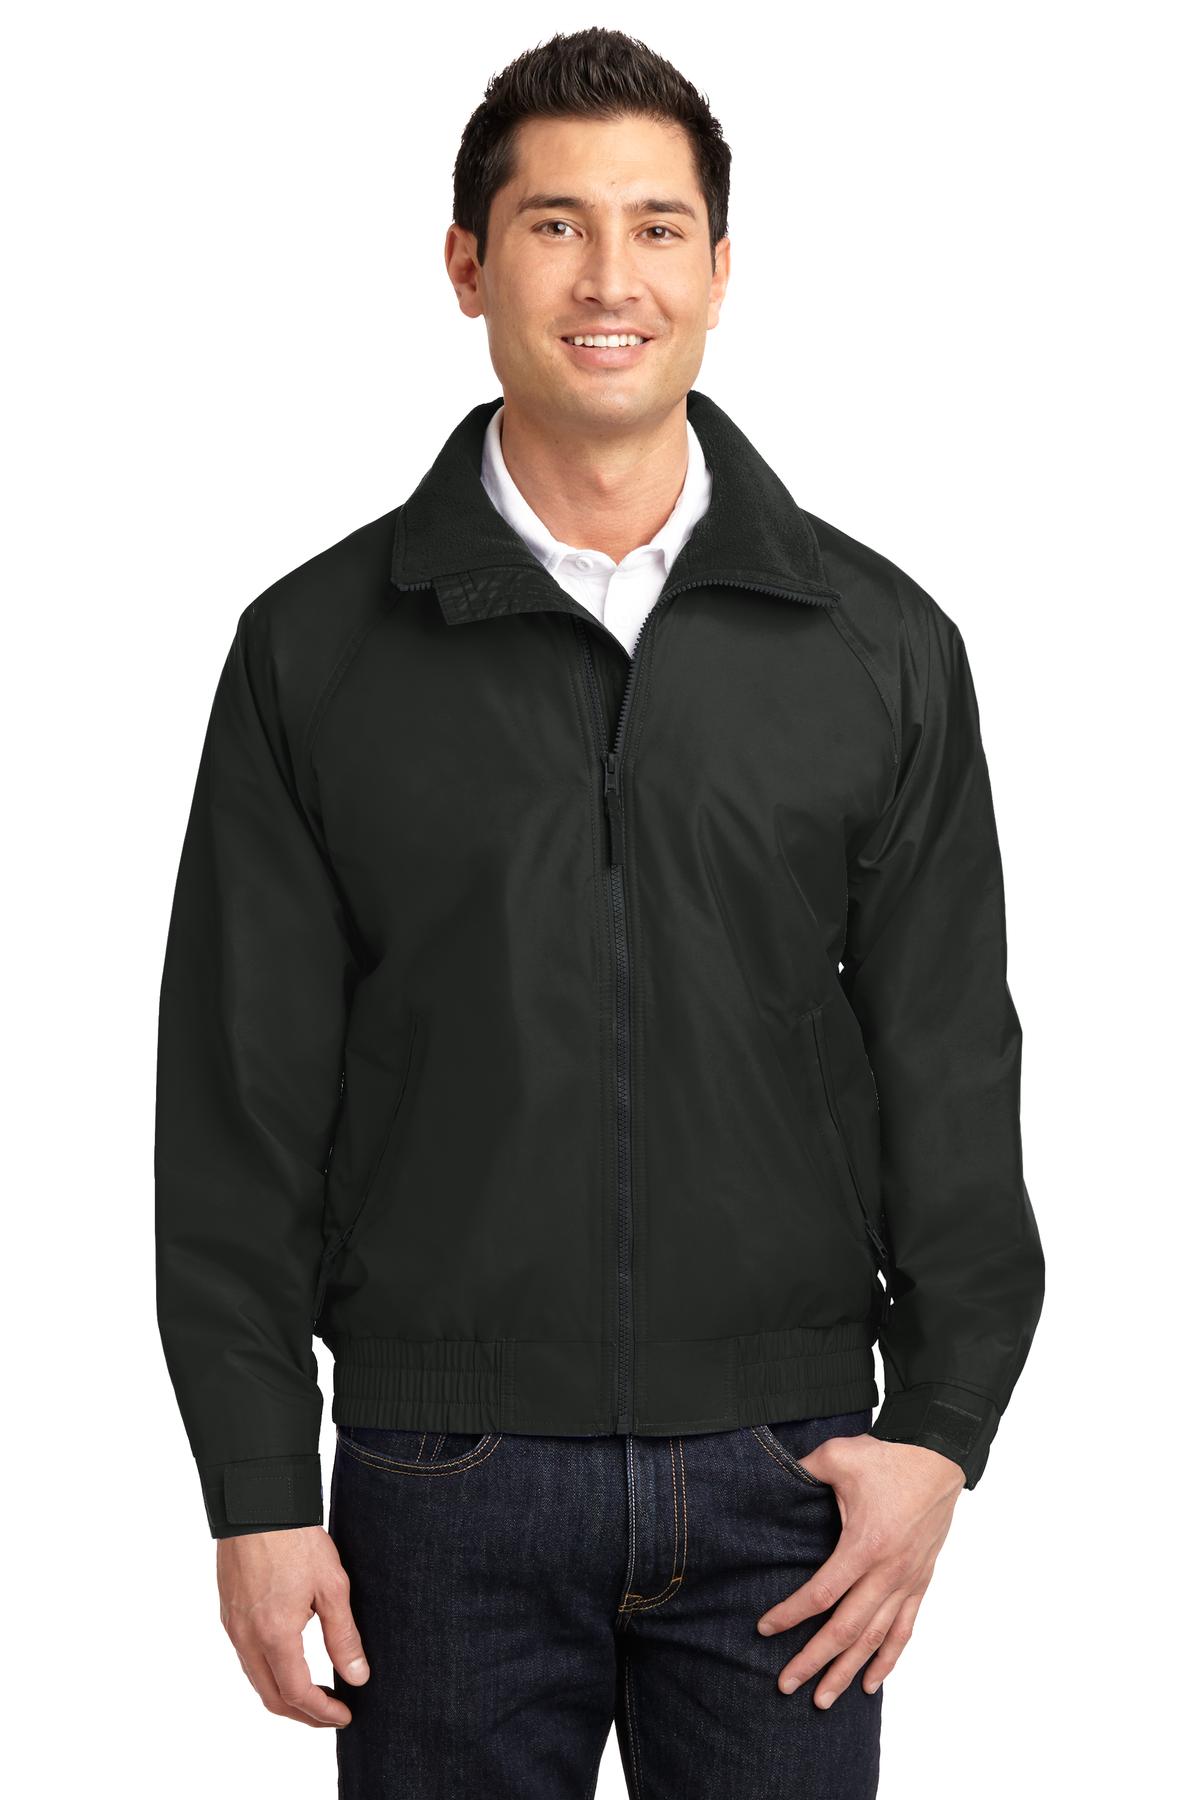 Port Authority Hospitality Outerwear ® Competitor Jacket.-Port Authority